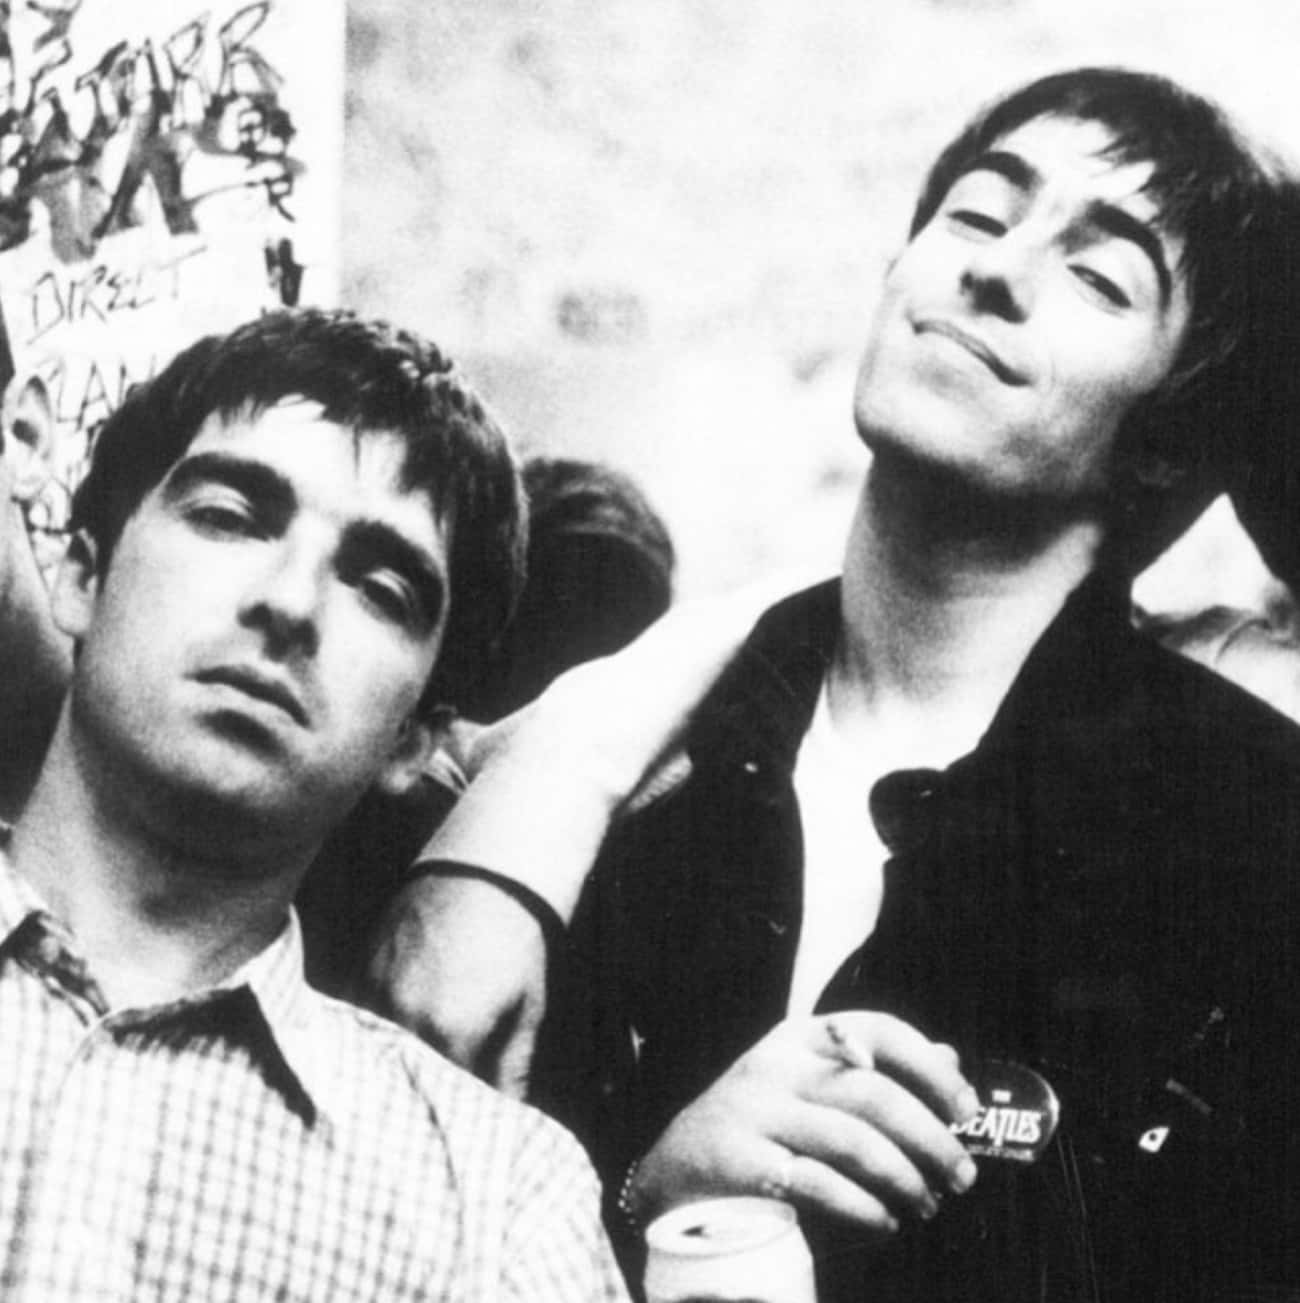 At A 1994 Concert At Whisky A Go Go, Oasis Brothers Liam And Noel Gallagher Started Brawling